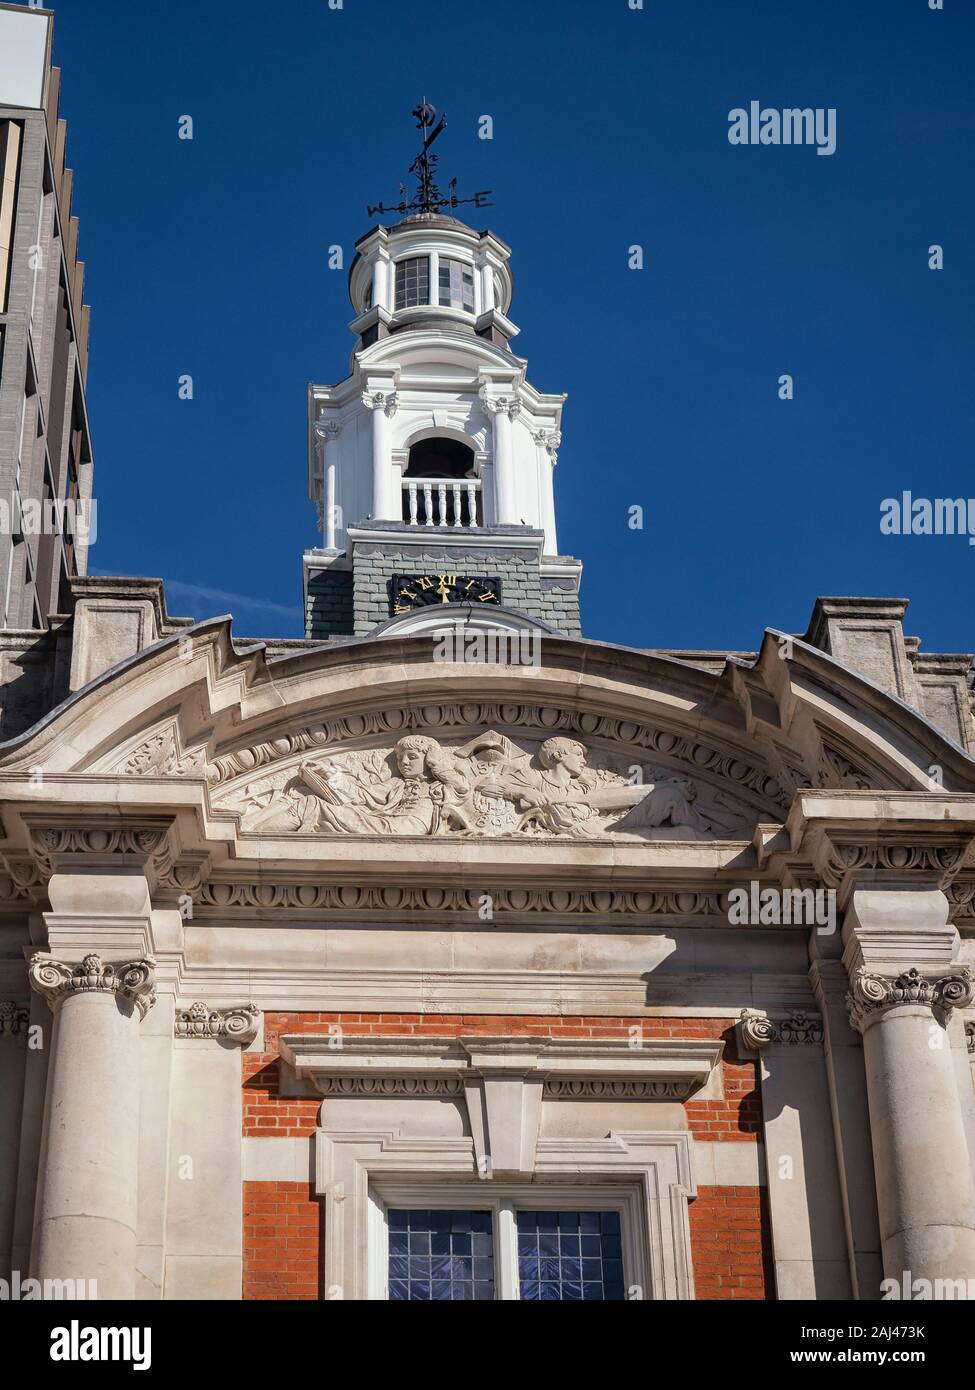 SOUTHWARK, LONDON:  Clock Tower of the LaLiT London Hotel - a 5 star luxury hotel in Tooley Street. Stock Photo